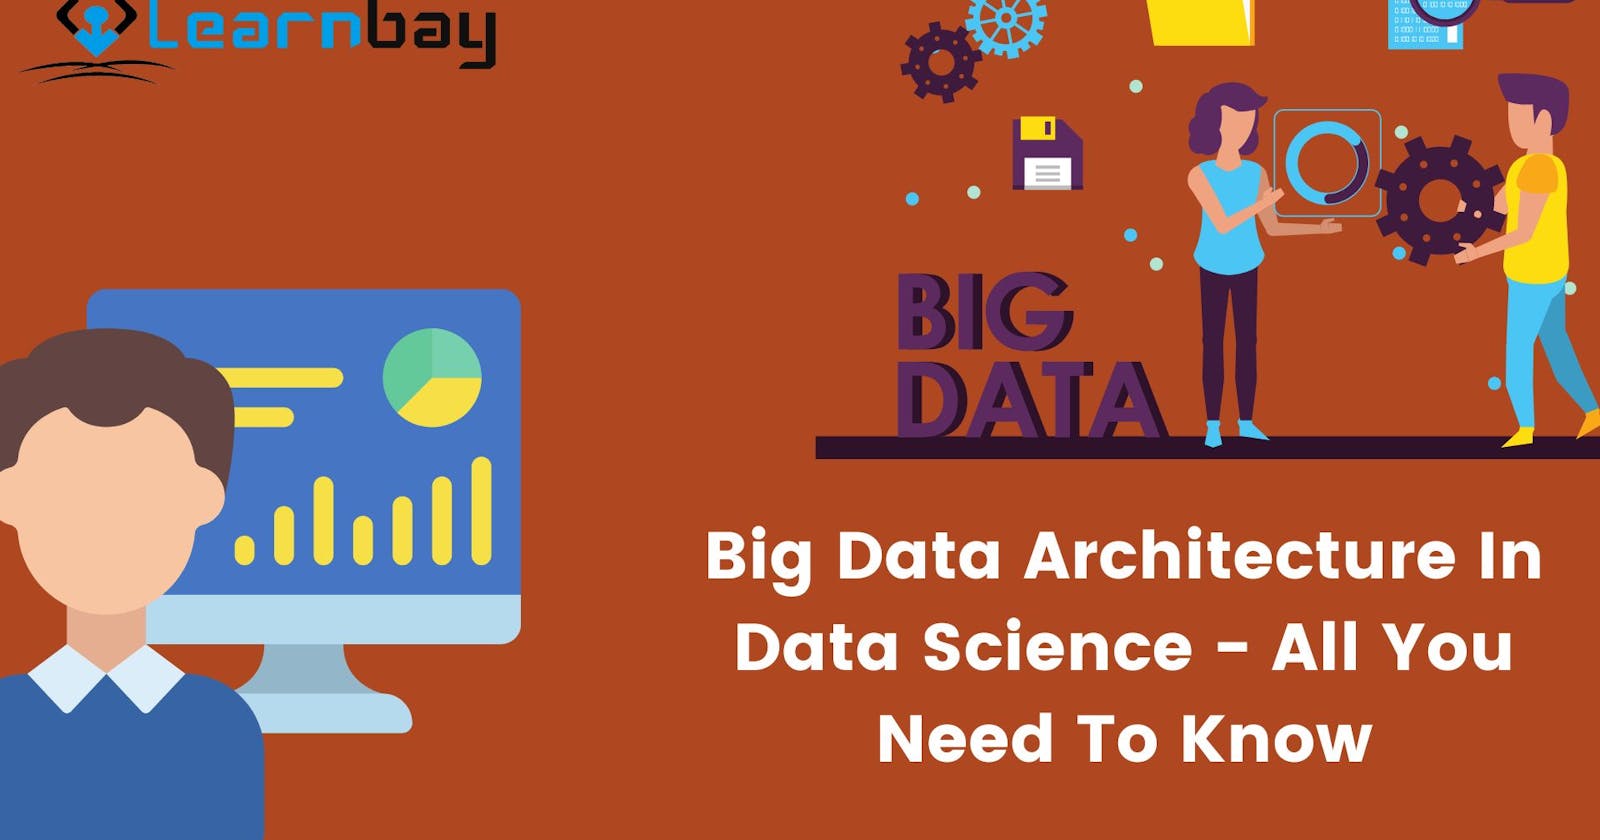 Big Data Architecture In Data Science - All You Need To Know